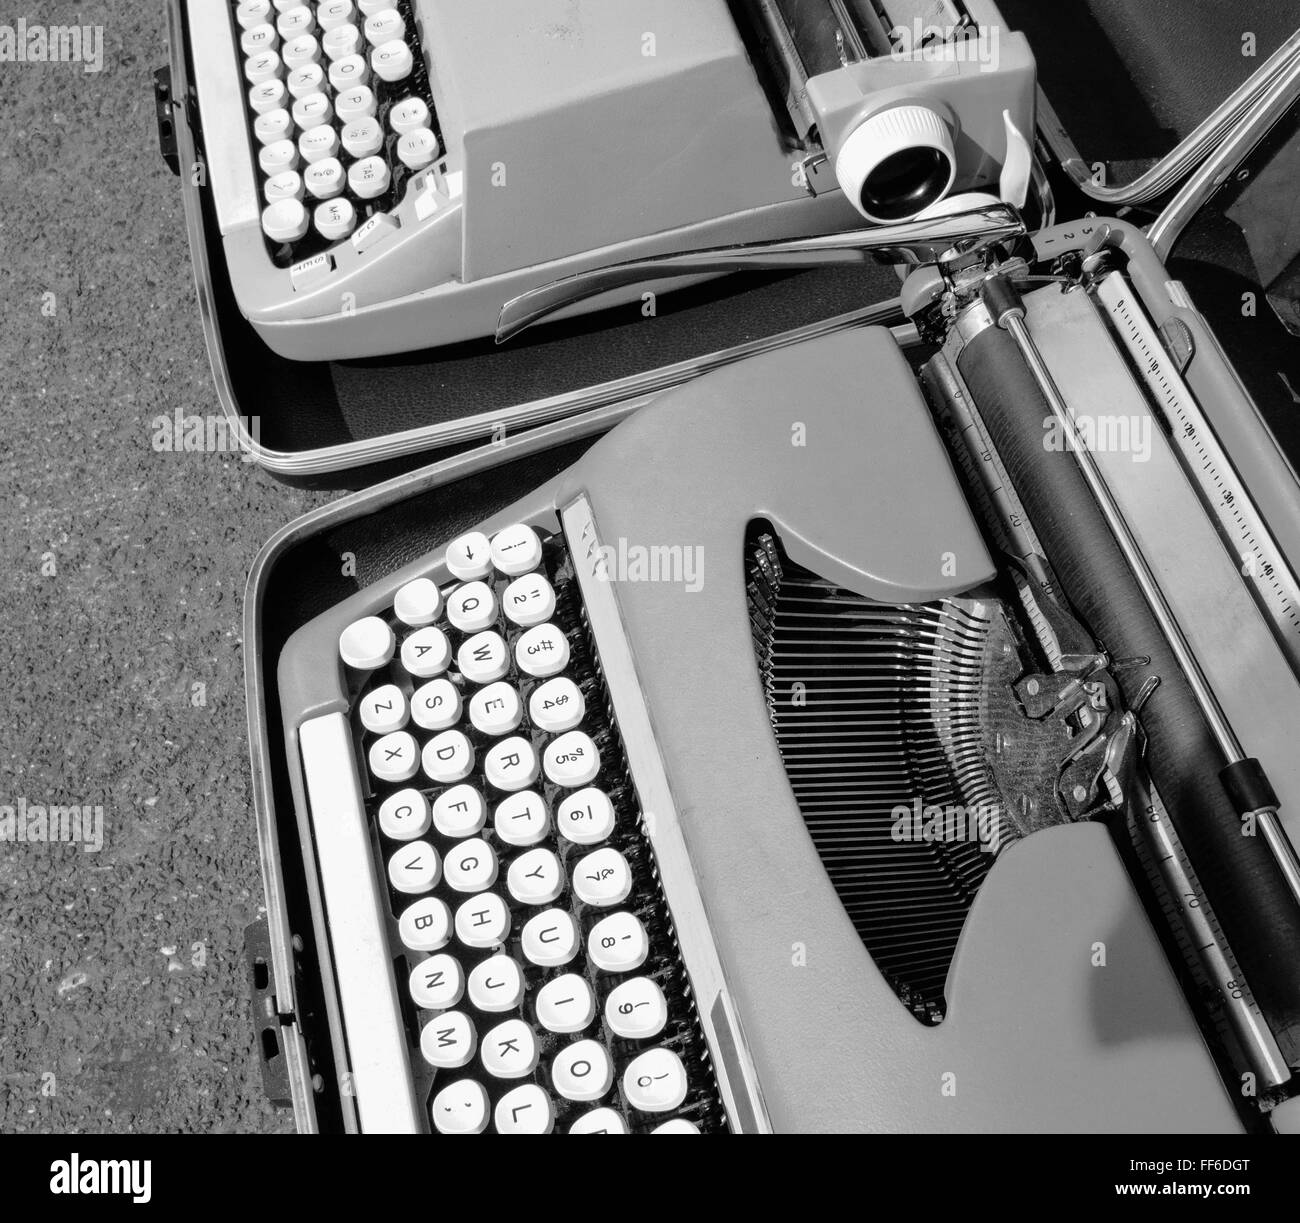 Two typewriters on a market stall in Fremont Market, Seattle. Stock Photo